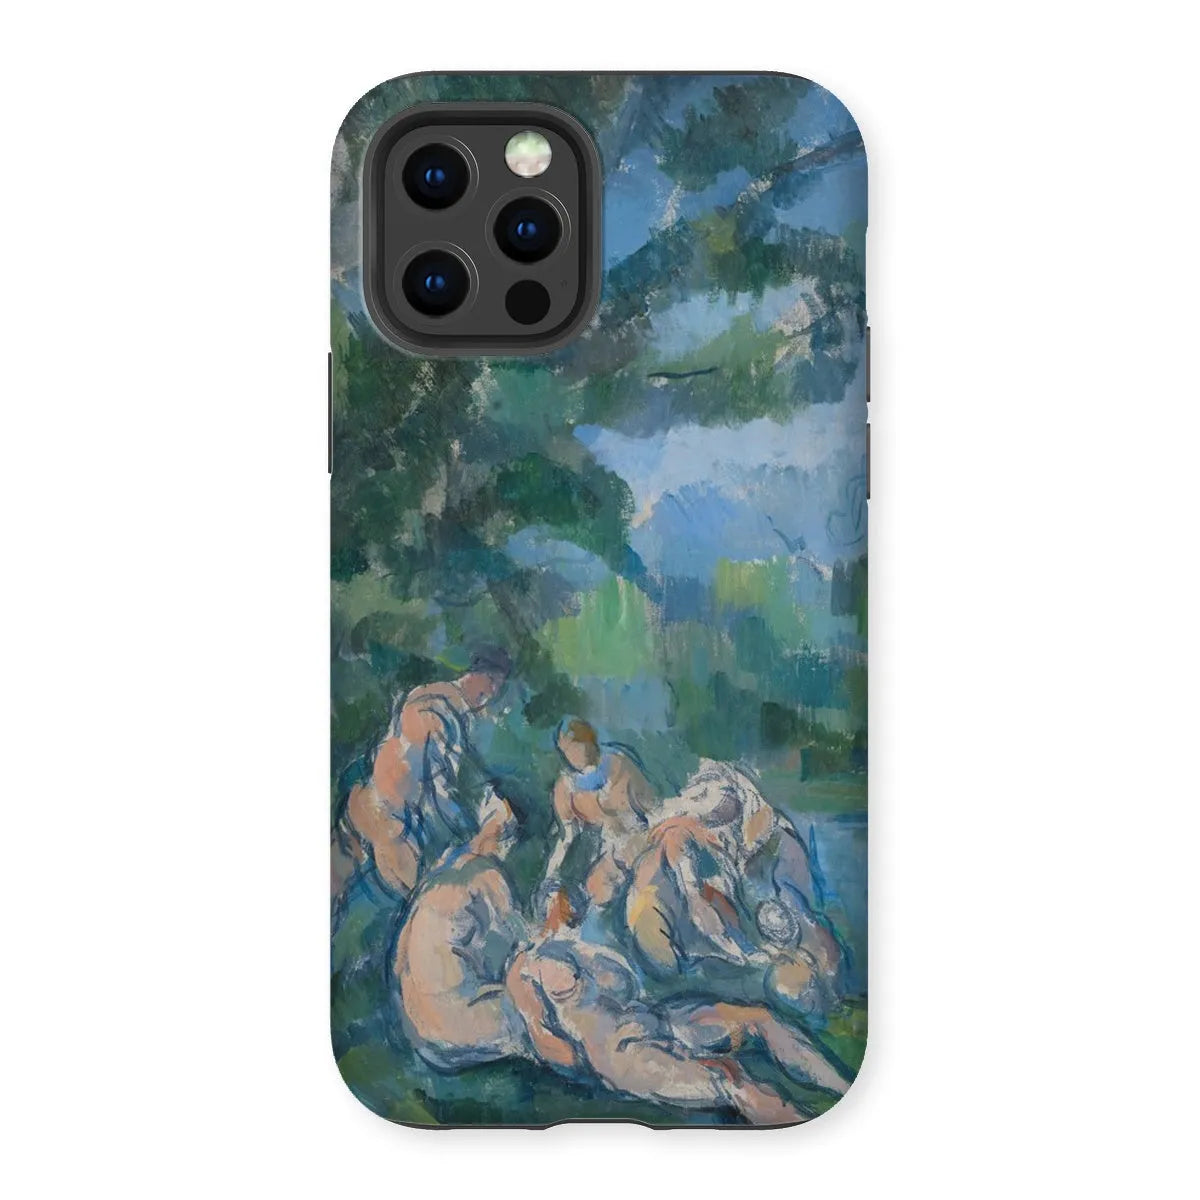 The Bathers - Post-impressionism Phone Case - Paul Cezanne - Iphone 12 Pro / Matte - Mobile Phone Cases - Aesthetic Art